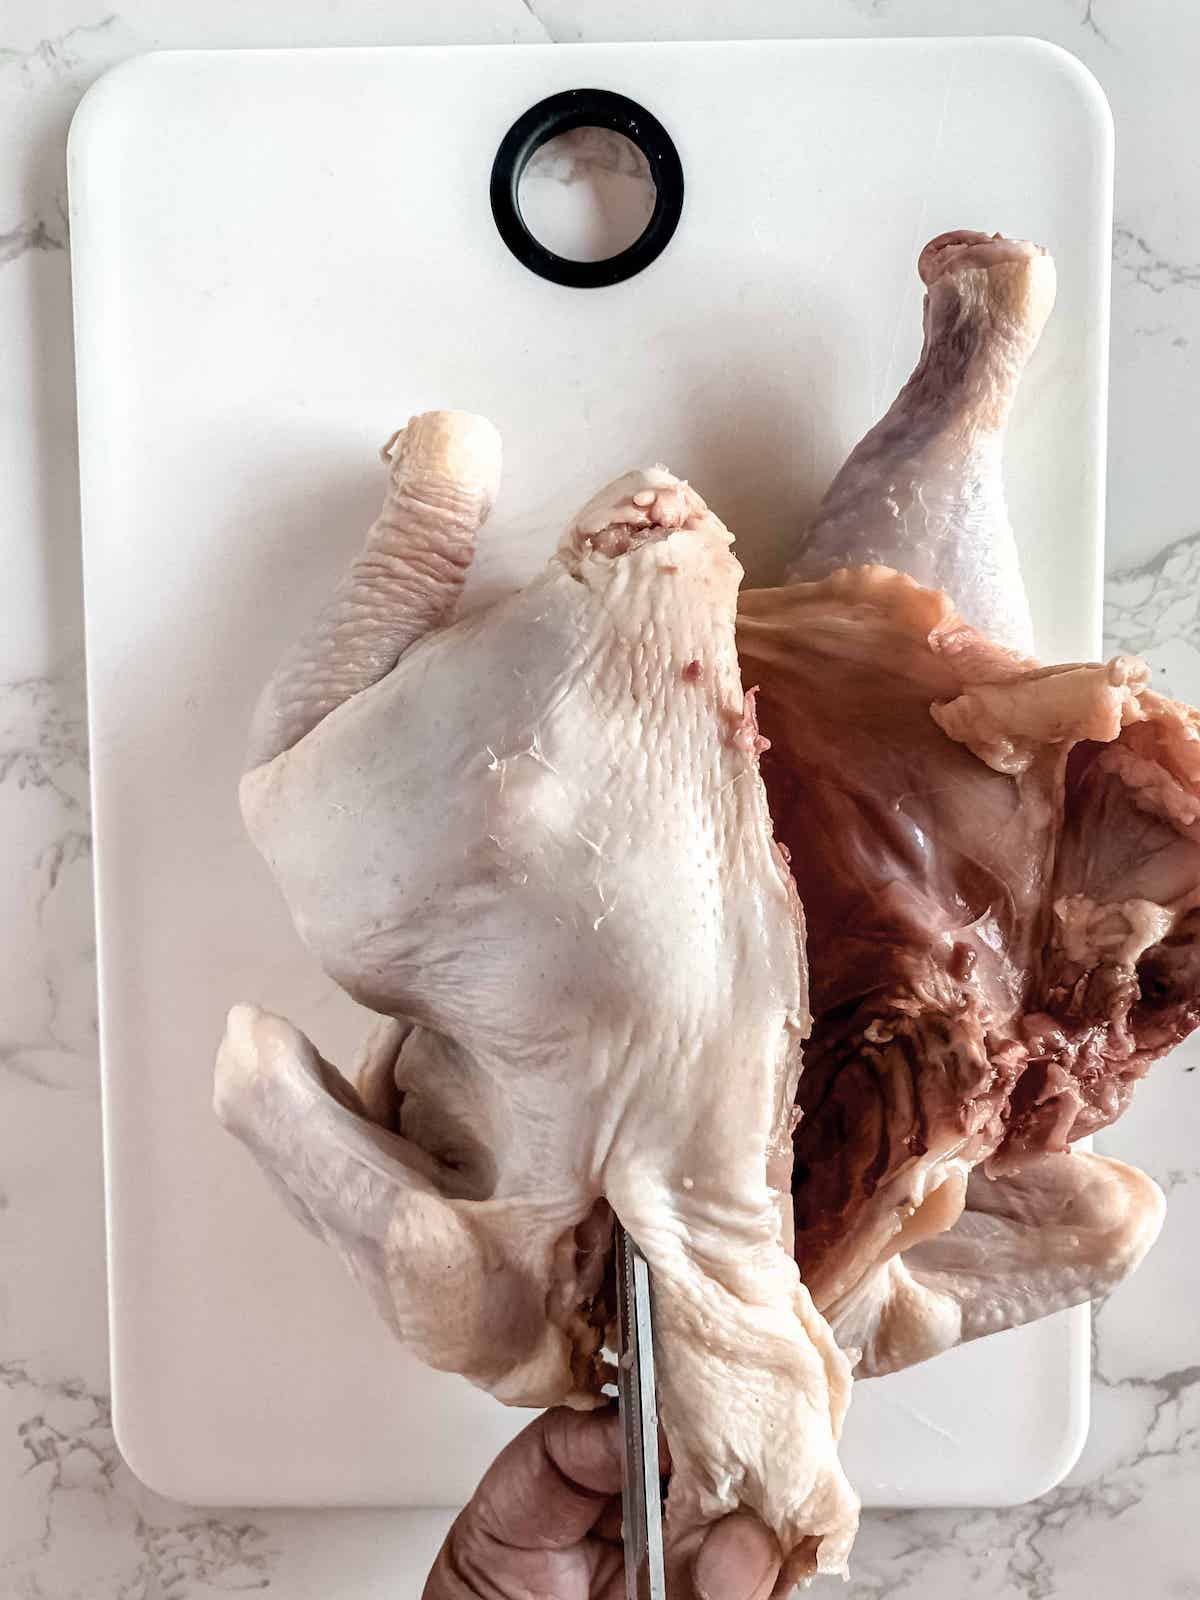 Brown hands using kitchen shears to remove backbone of whole raw chicken.